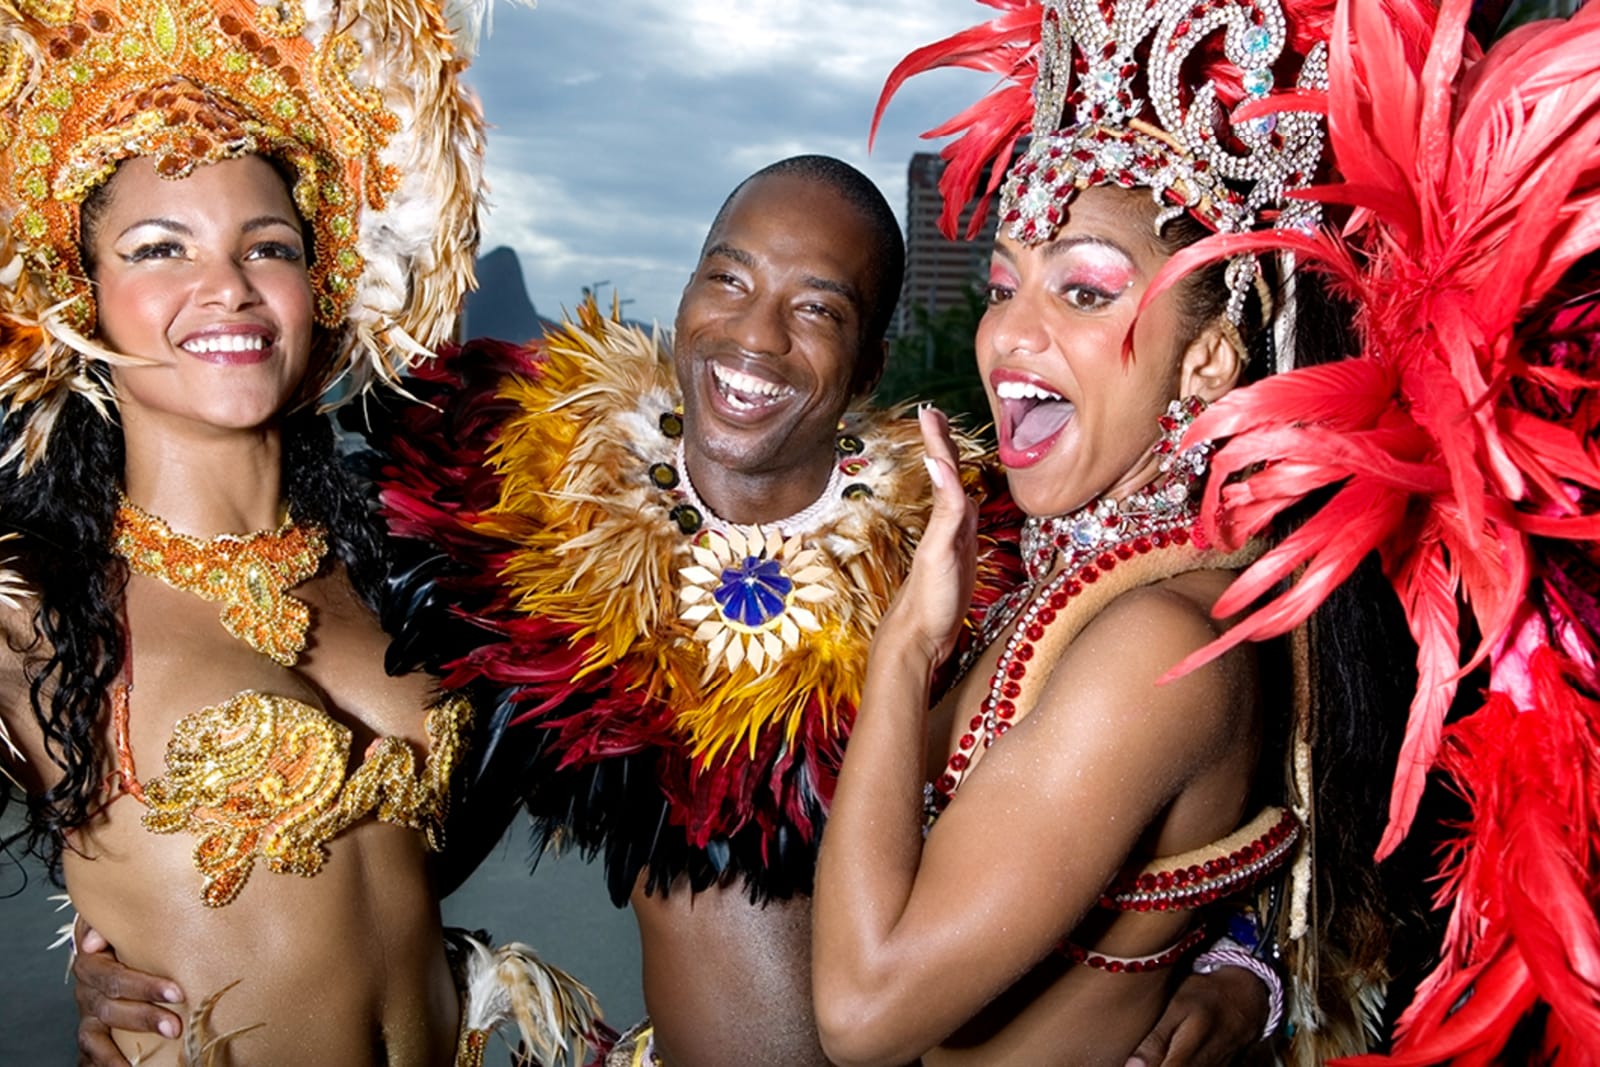 Festival-goers at the Rio Carnival